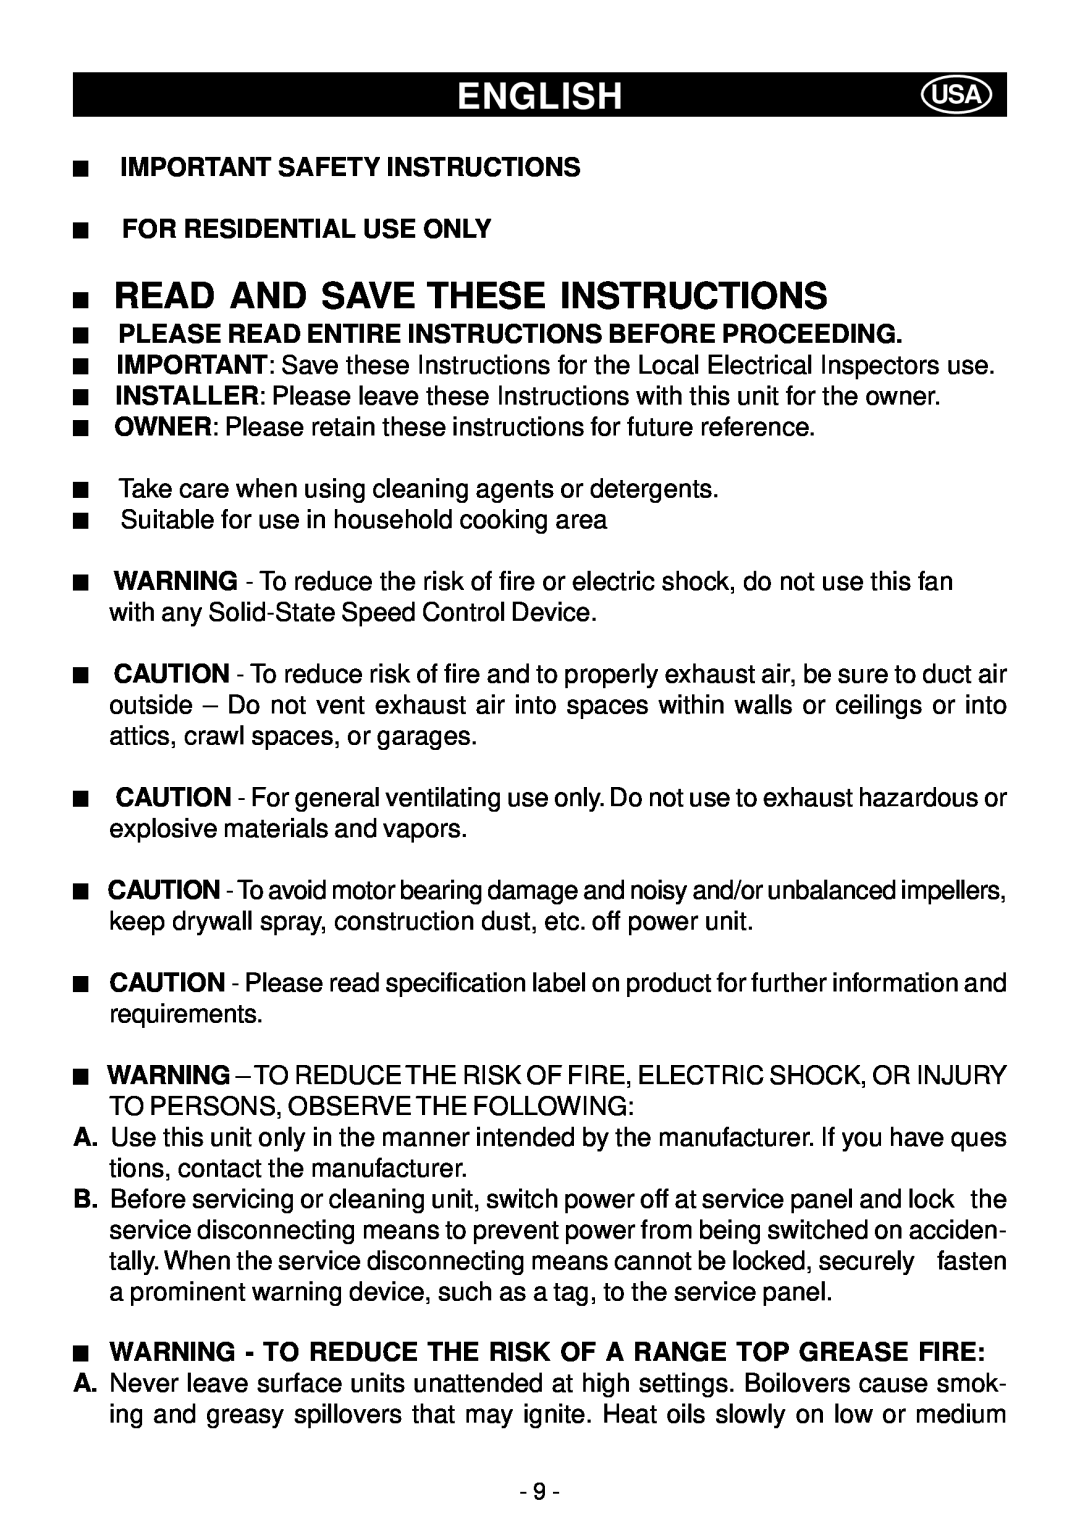 Elitair PN-I manual Englishusa, Read And Save These Instructions, Important Safety Instructions For Residential Use Only 